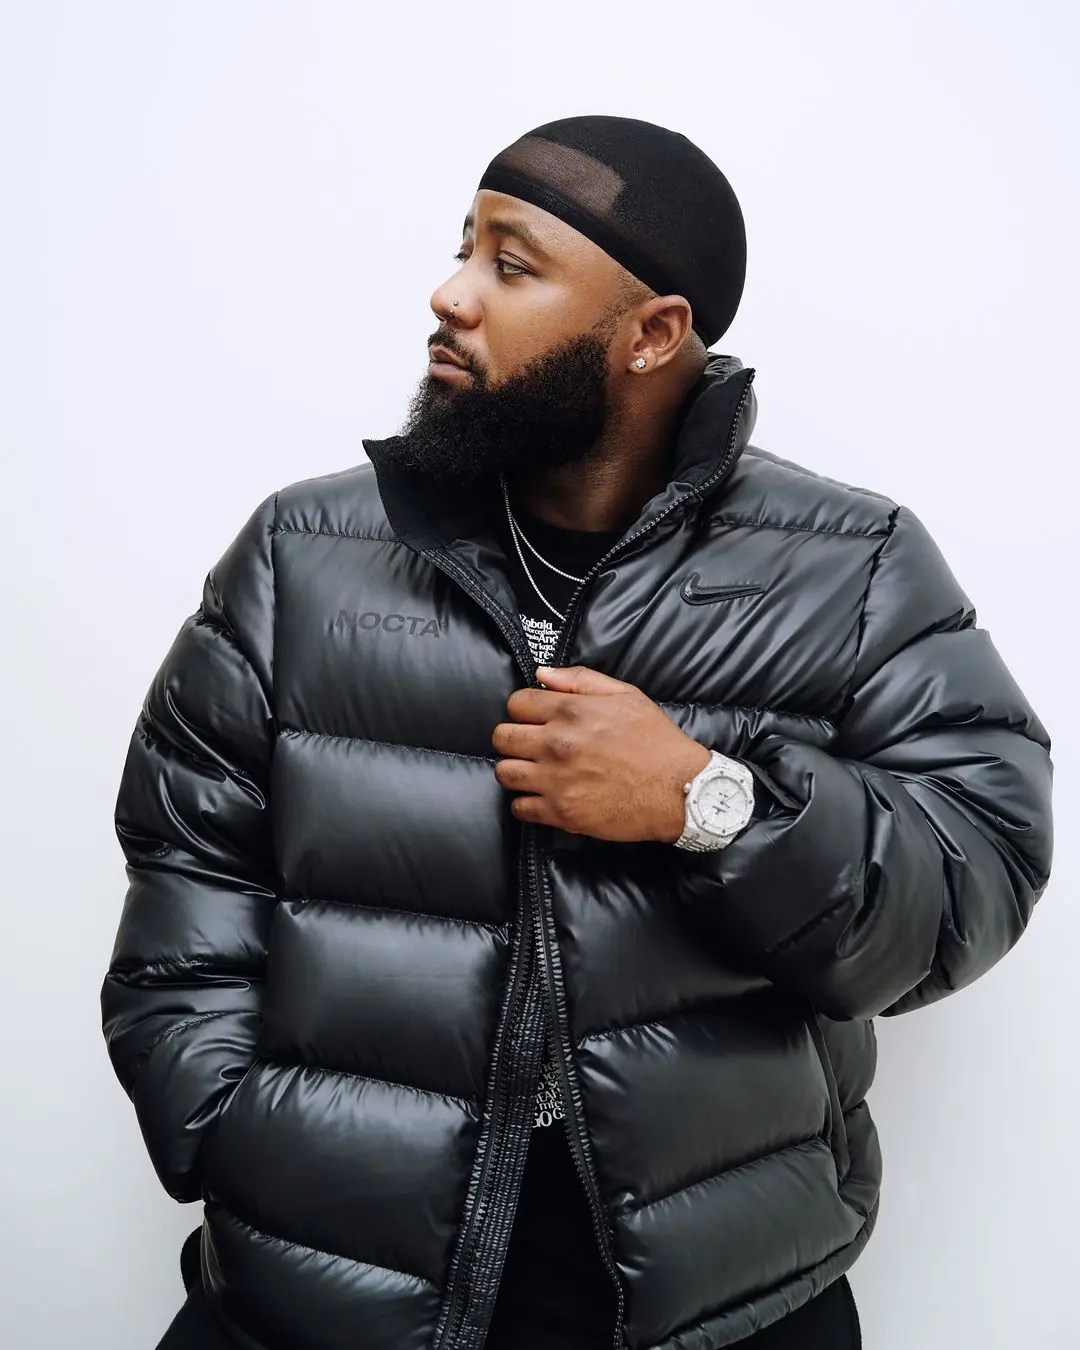 Cassper Nyovest responds to Prince Kaybee’s comments on his private parts